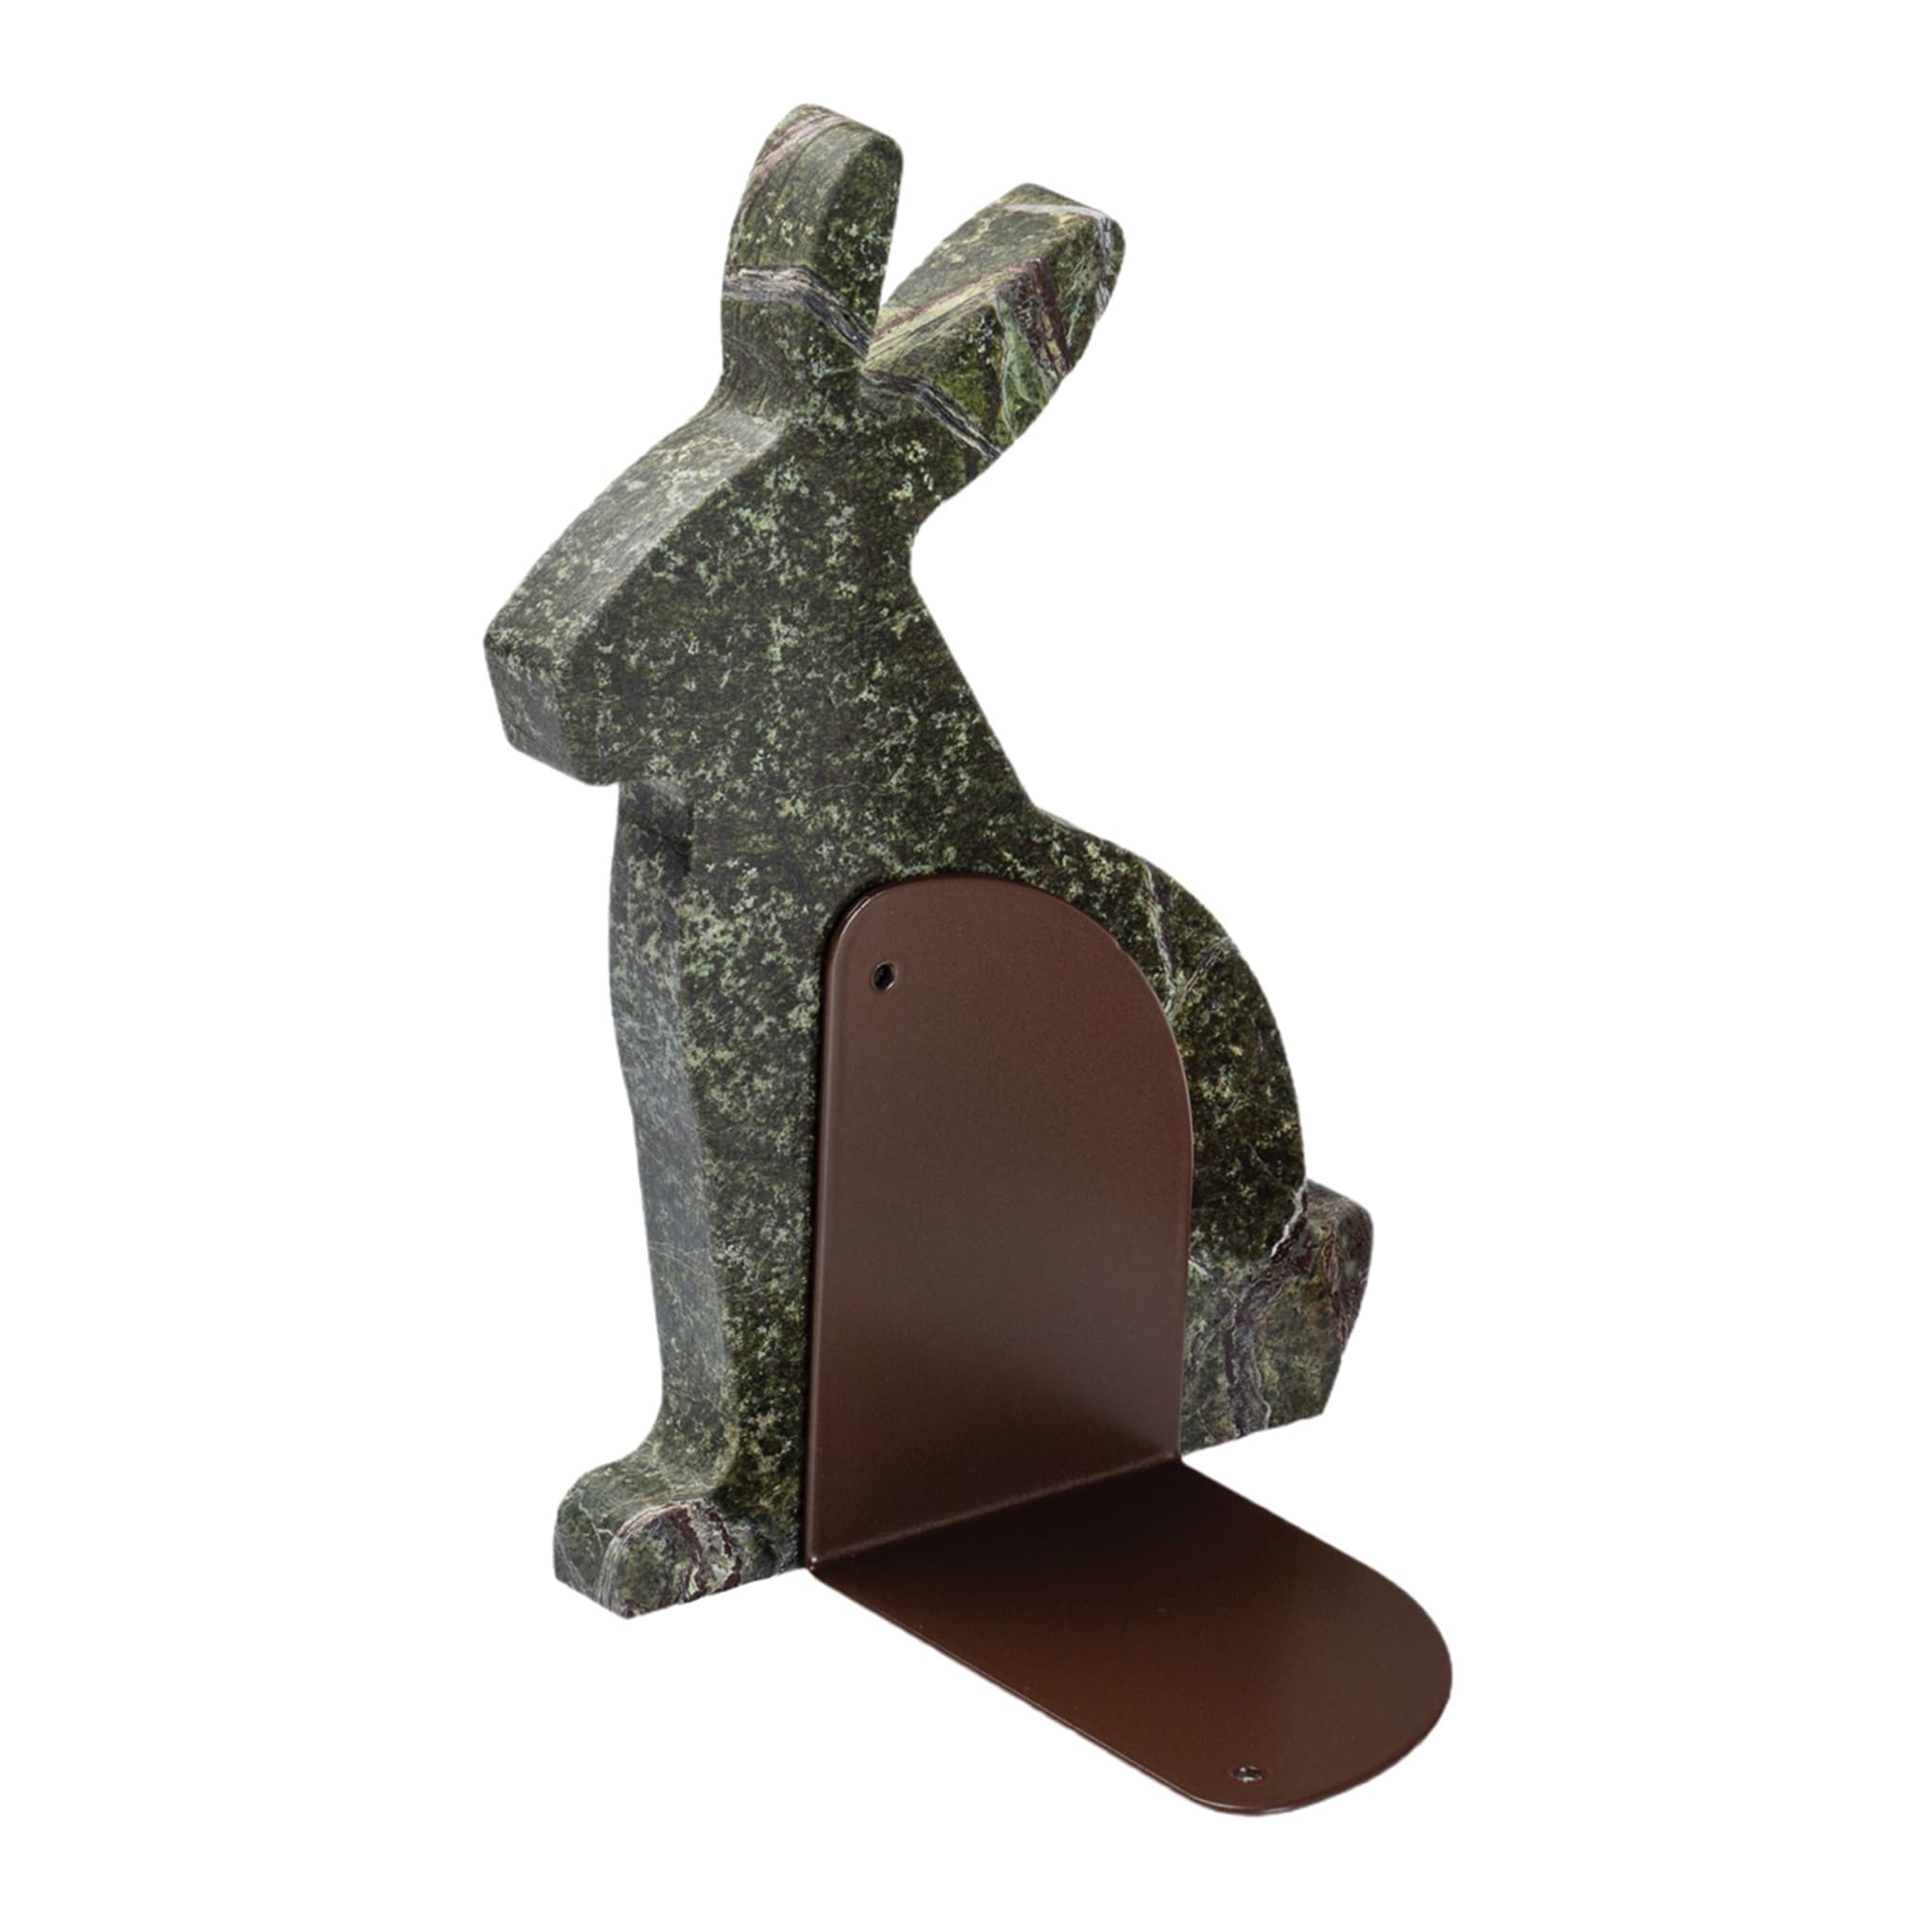 Bunny Set of 2 Picasso Green Bookends by Alessandra Grasso - Alternative view 1